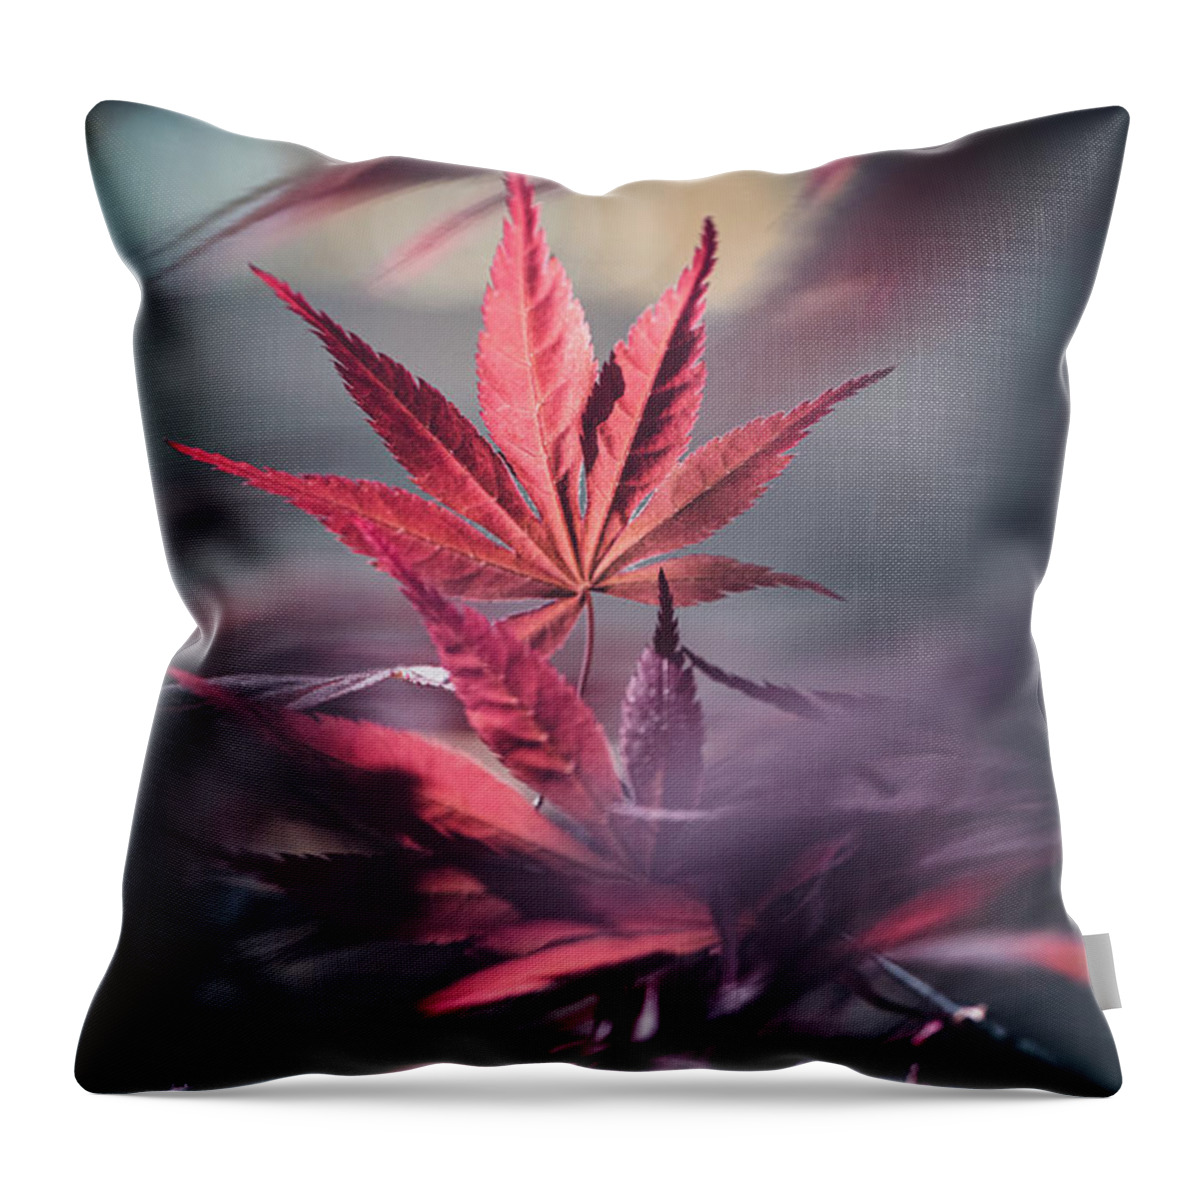 Leaves Throw Pillow featuring the photograph Eternity by Philippe Sainte-Laudy